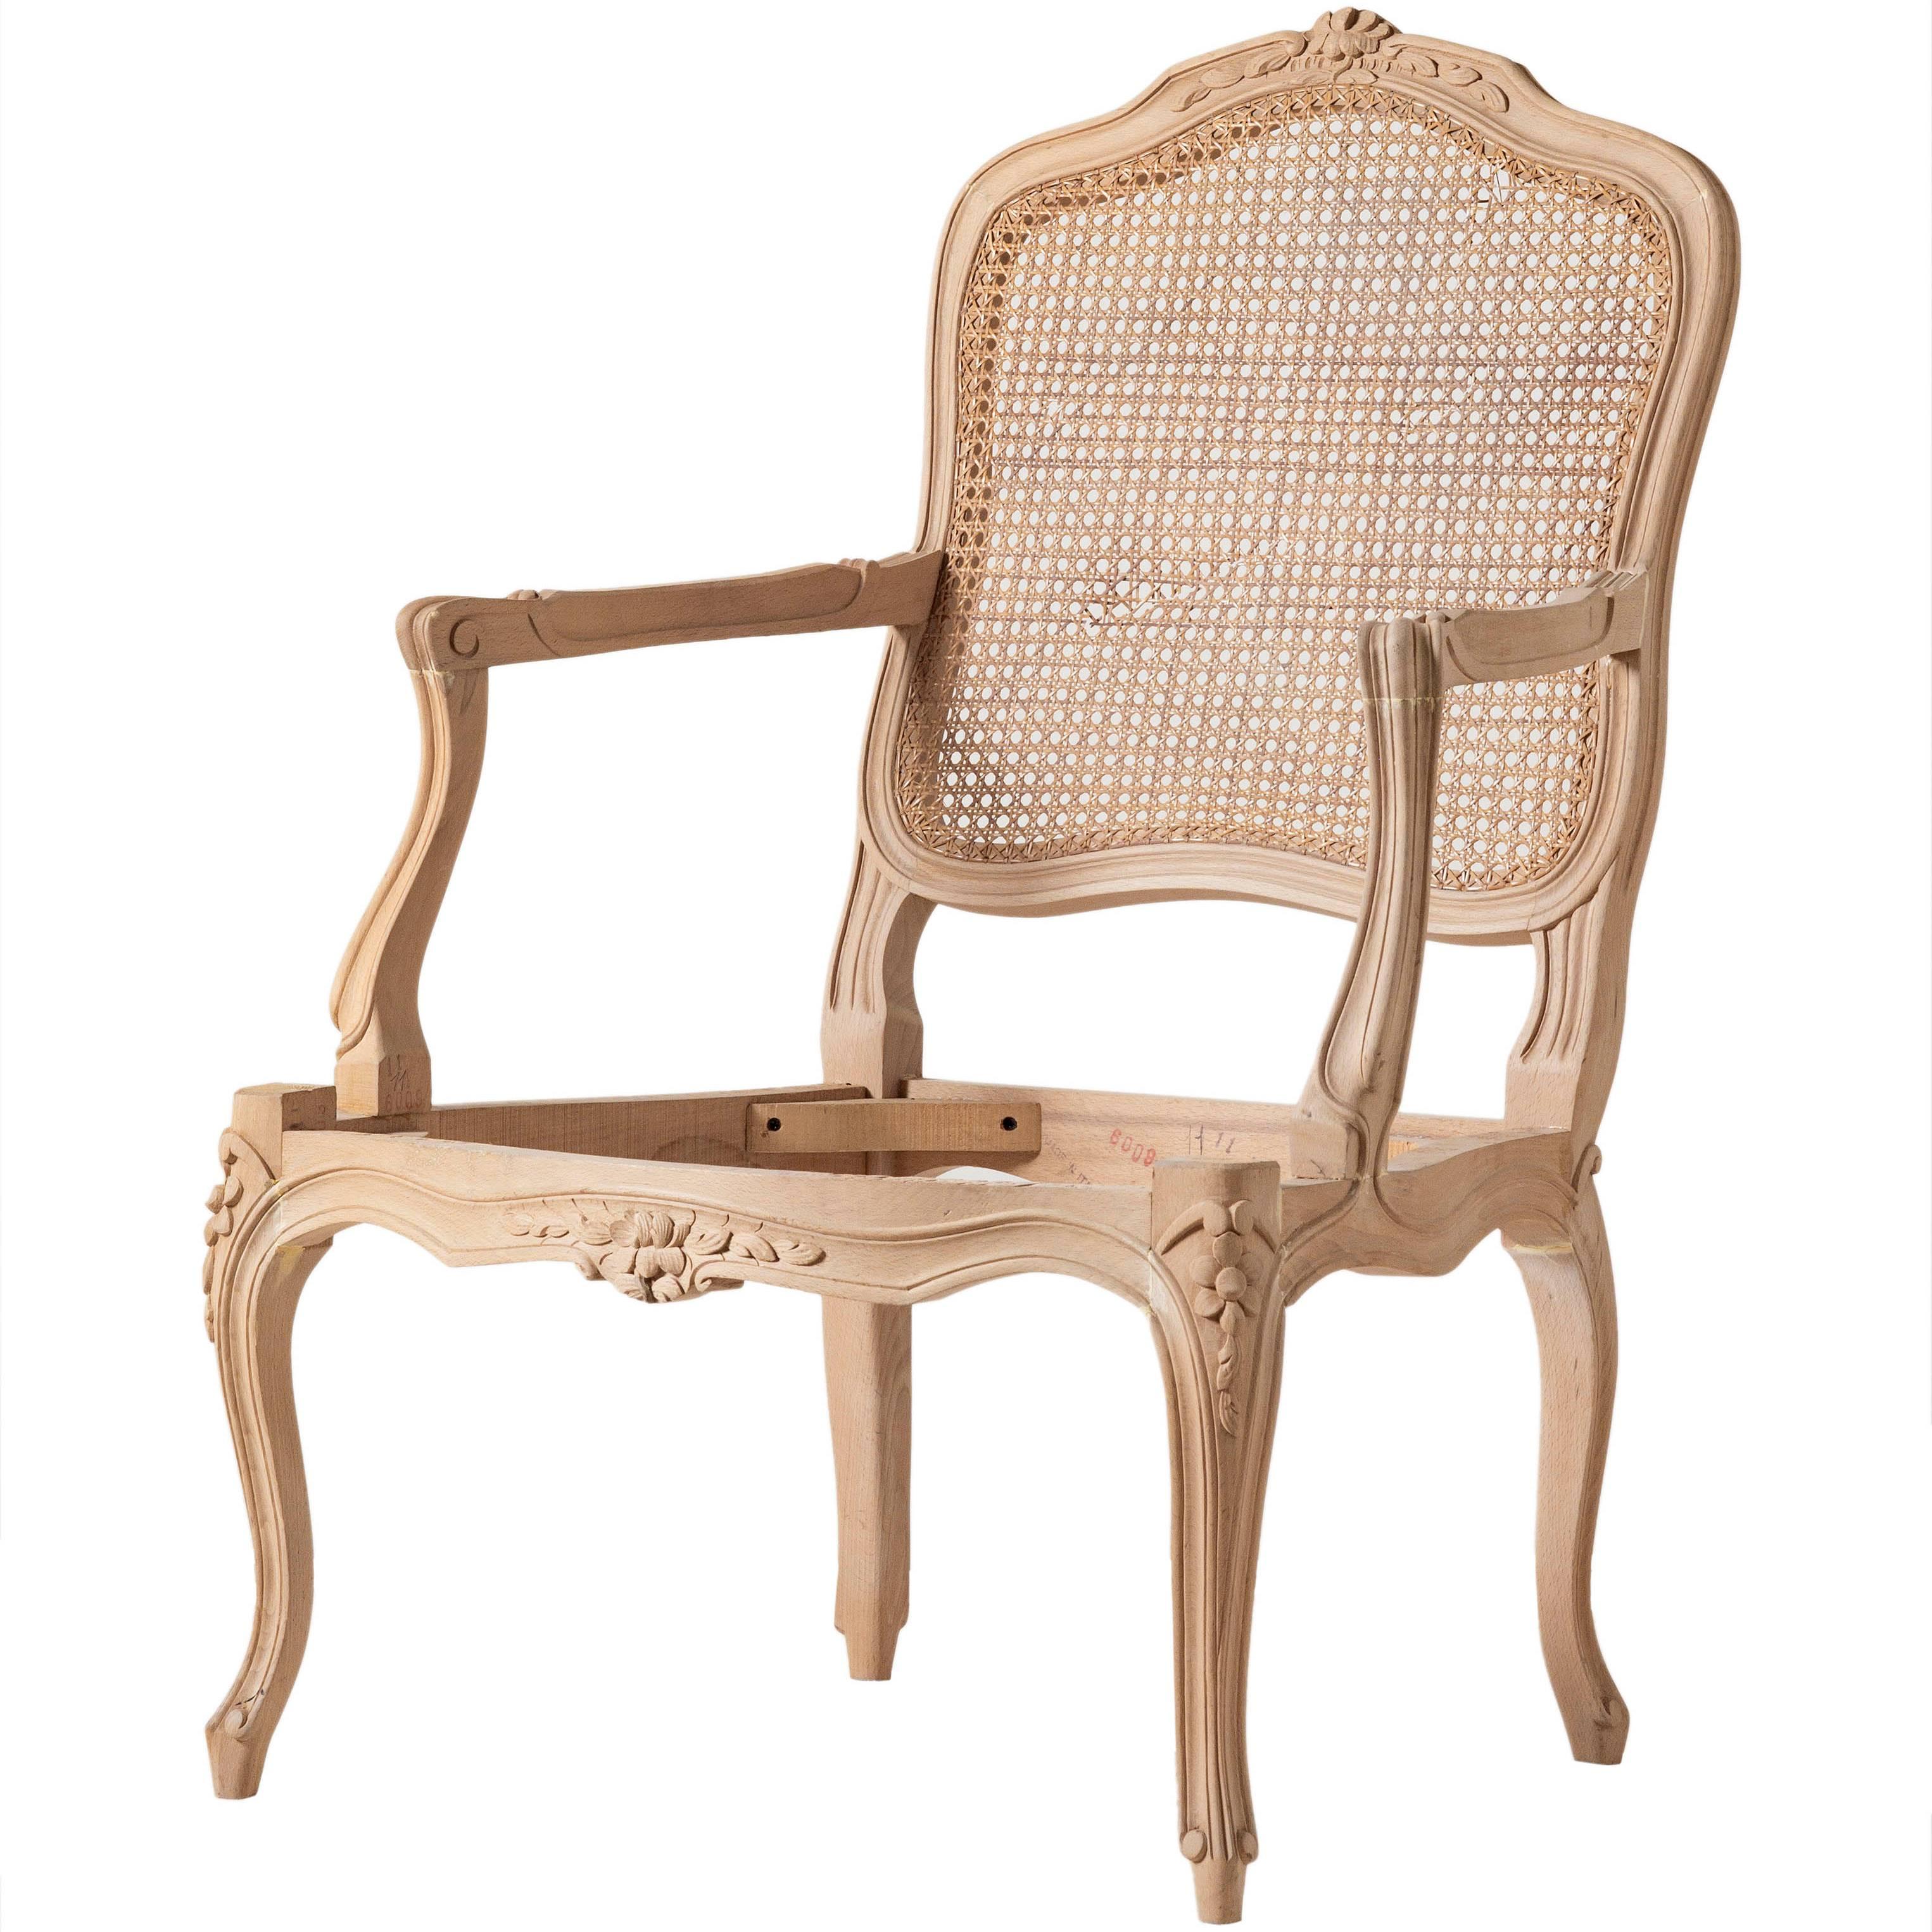 Louis XVI Style Open Armchair and Carved Italian Beechwood Chair